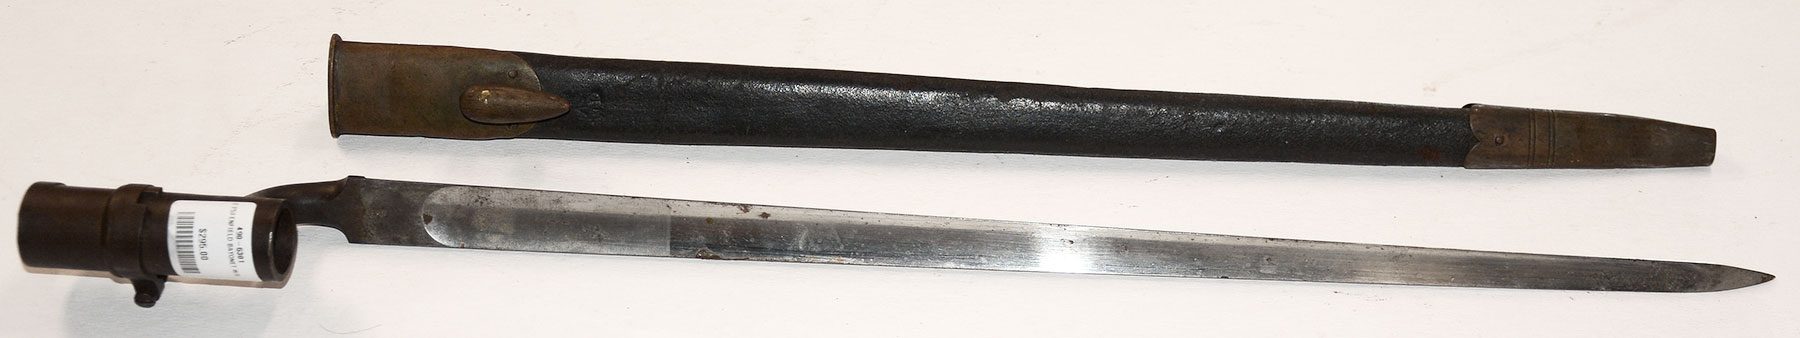 PATTERN 1853 ENFIELD BAYONET WITH SCABBARD